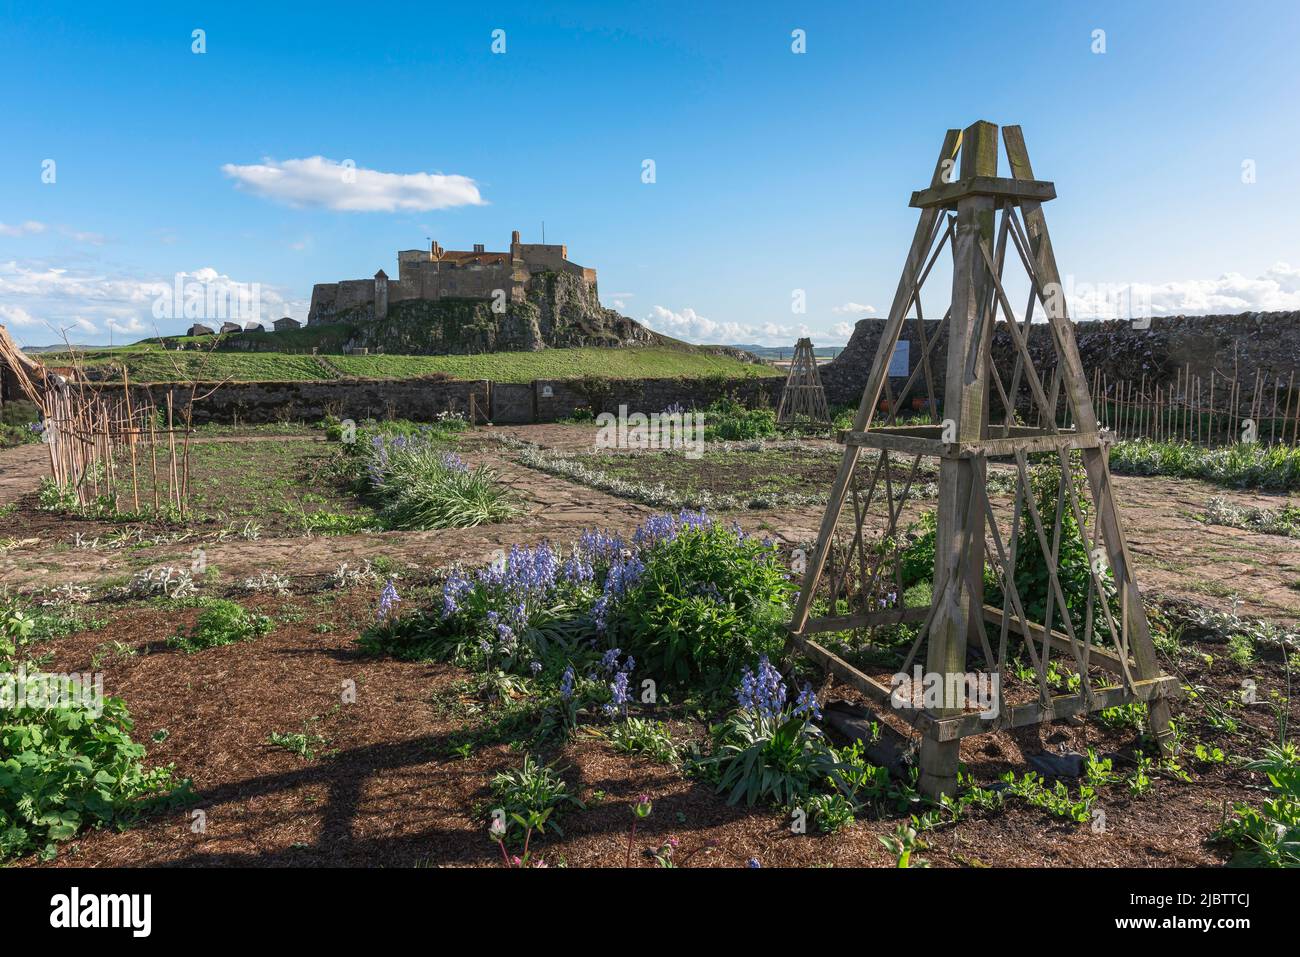 Gertrude Jekyll Garden, view of the walled garden located on Lindisfarne Island designed by Gertrude Jekyll in 1911, Northumberland coast, England UK Stock Photo